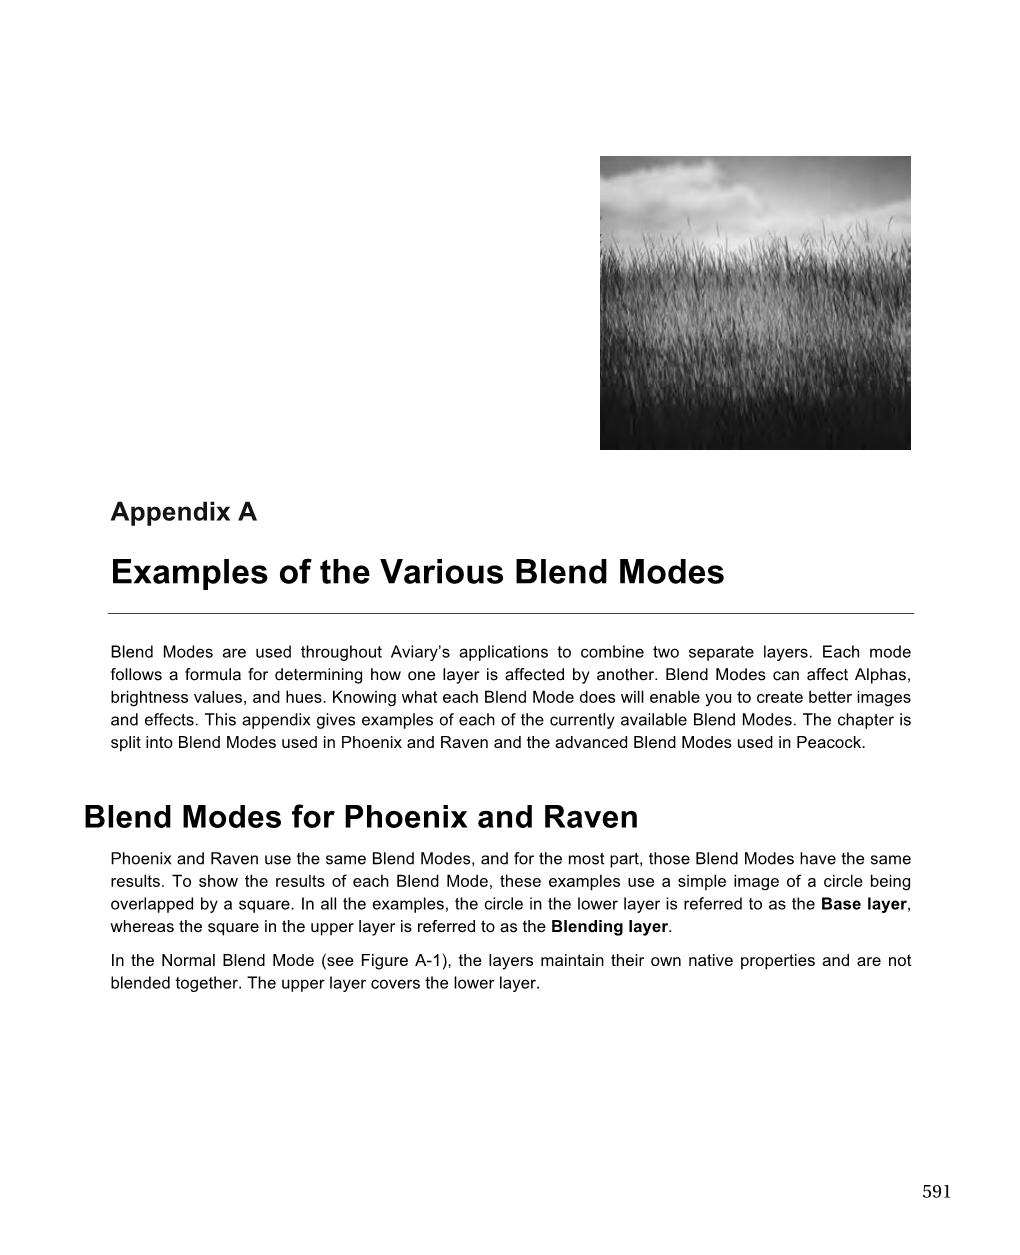 Examples of the Various Blend Modes